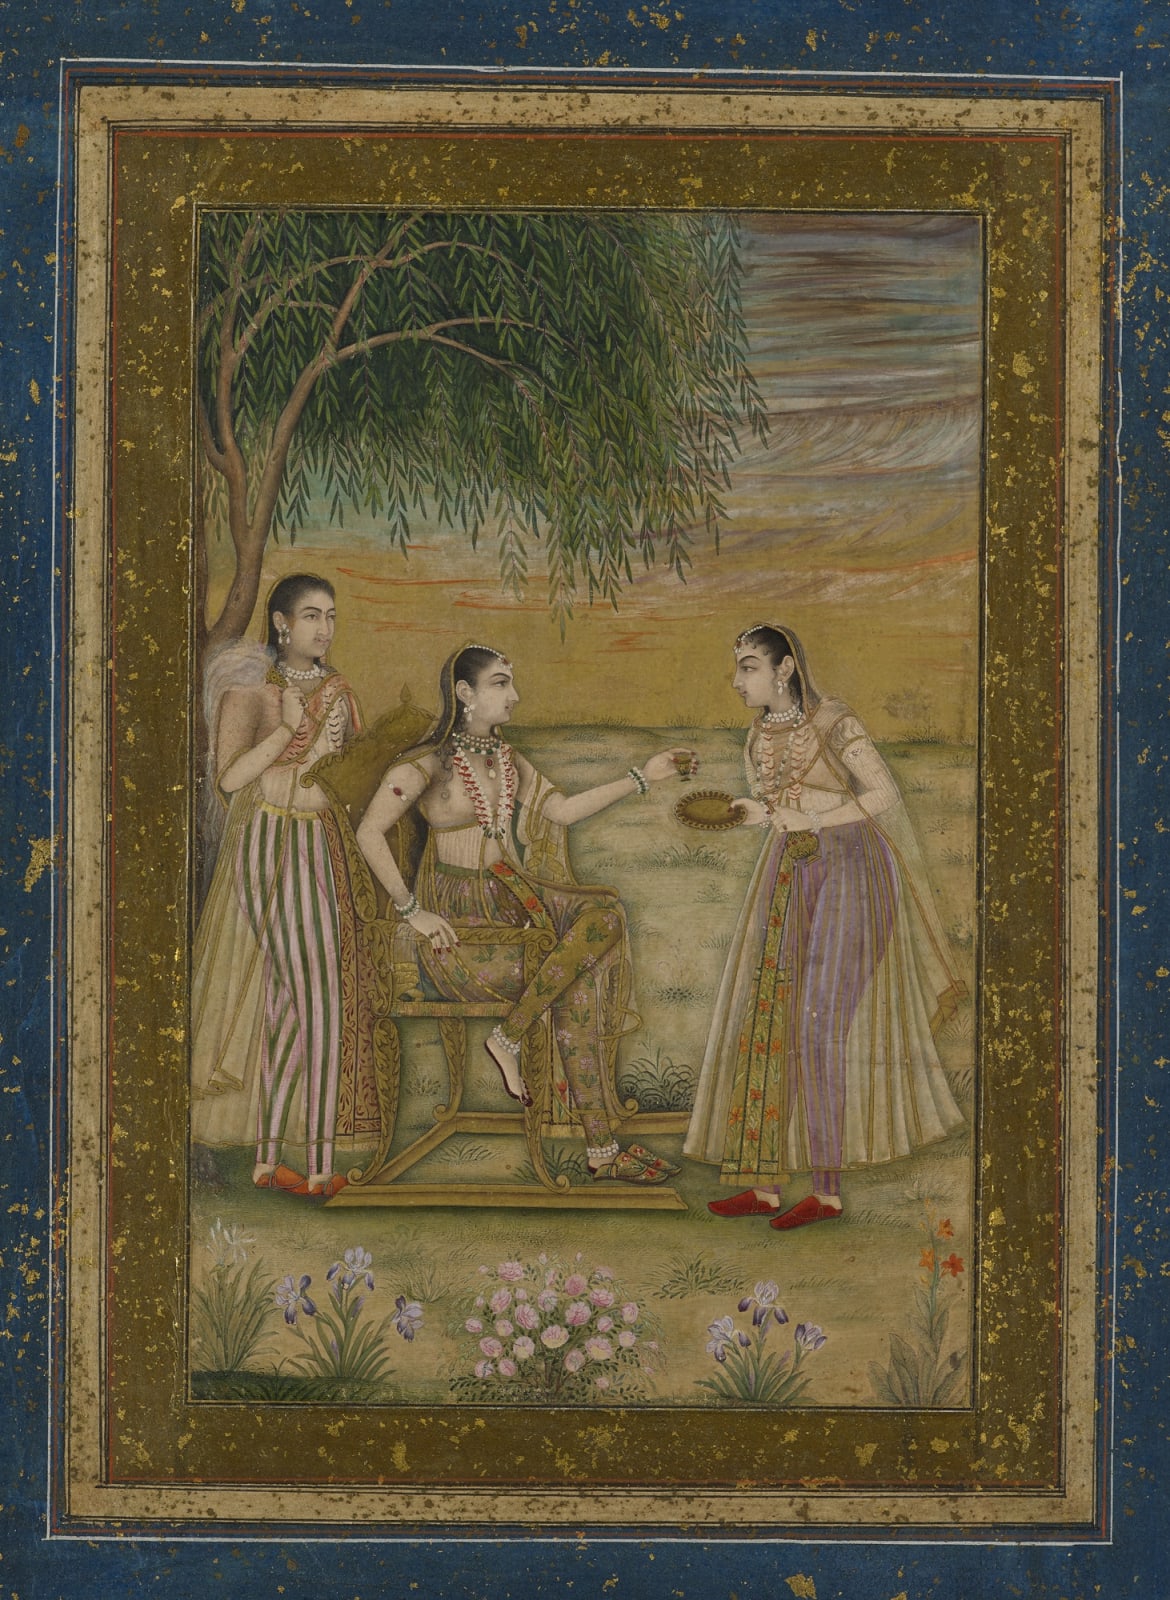 A Princess seated on a Throne beneath a Tree, with two female Attendants, Mughal, c. 1675